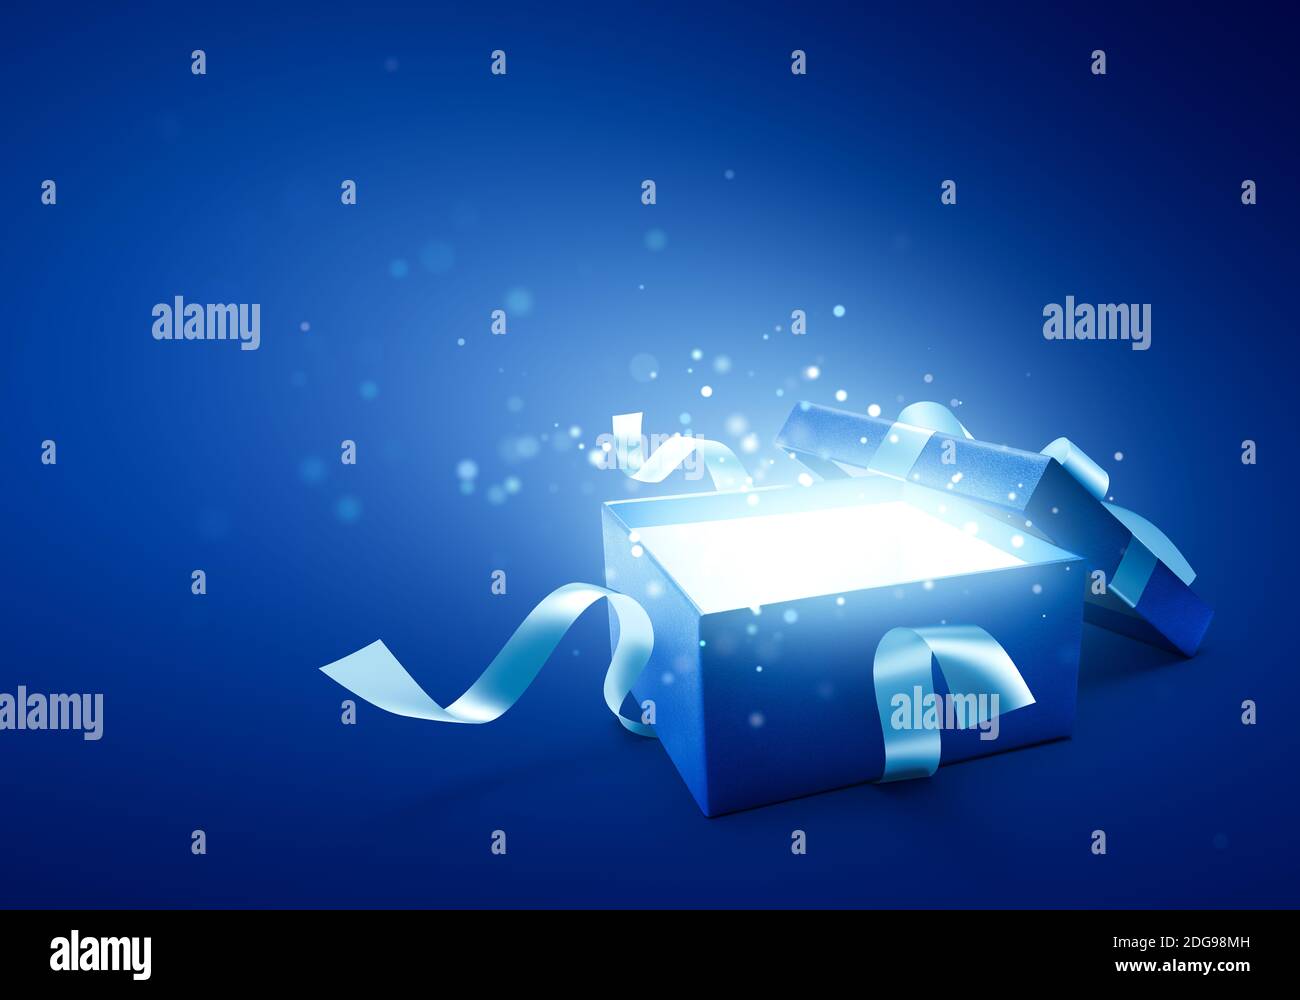 Blue open gift box with glittering / magical light Stock Photo